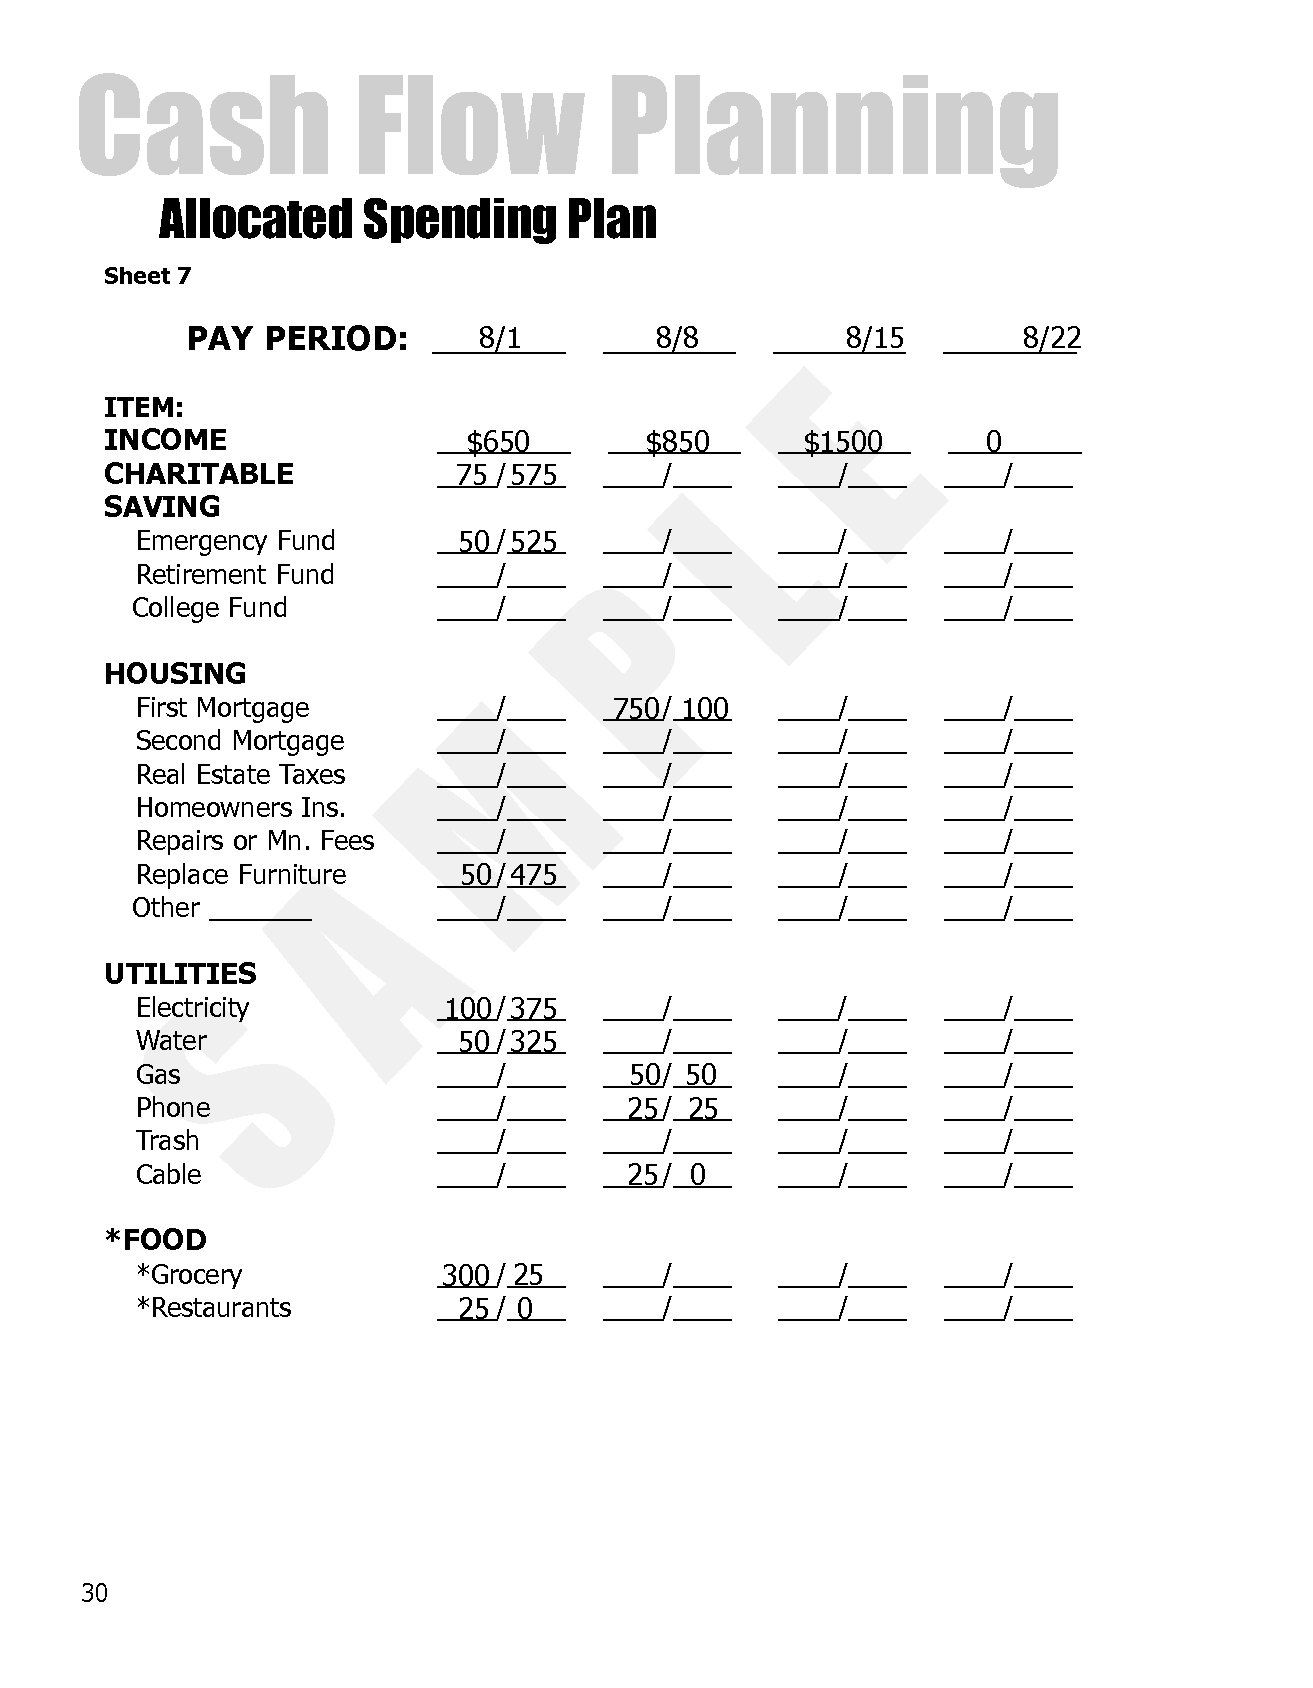 Dave Ramsey Allocated Spending Plan Budget Image